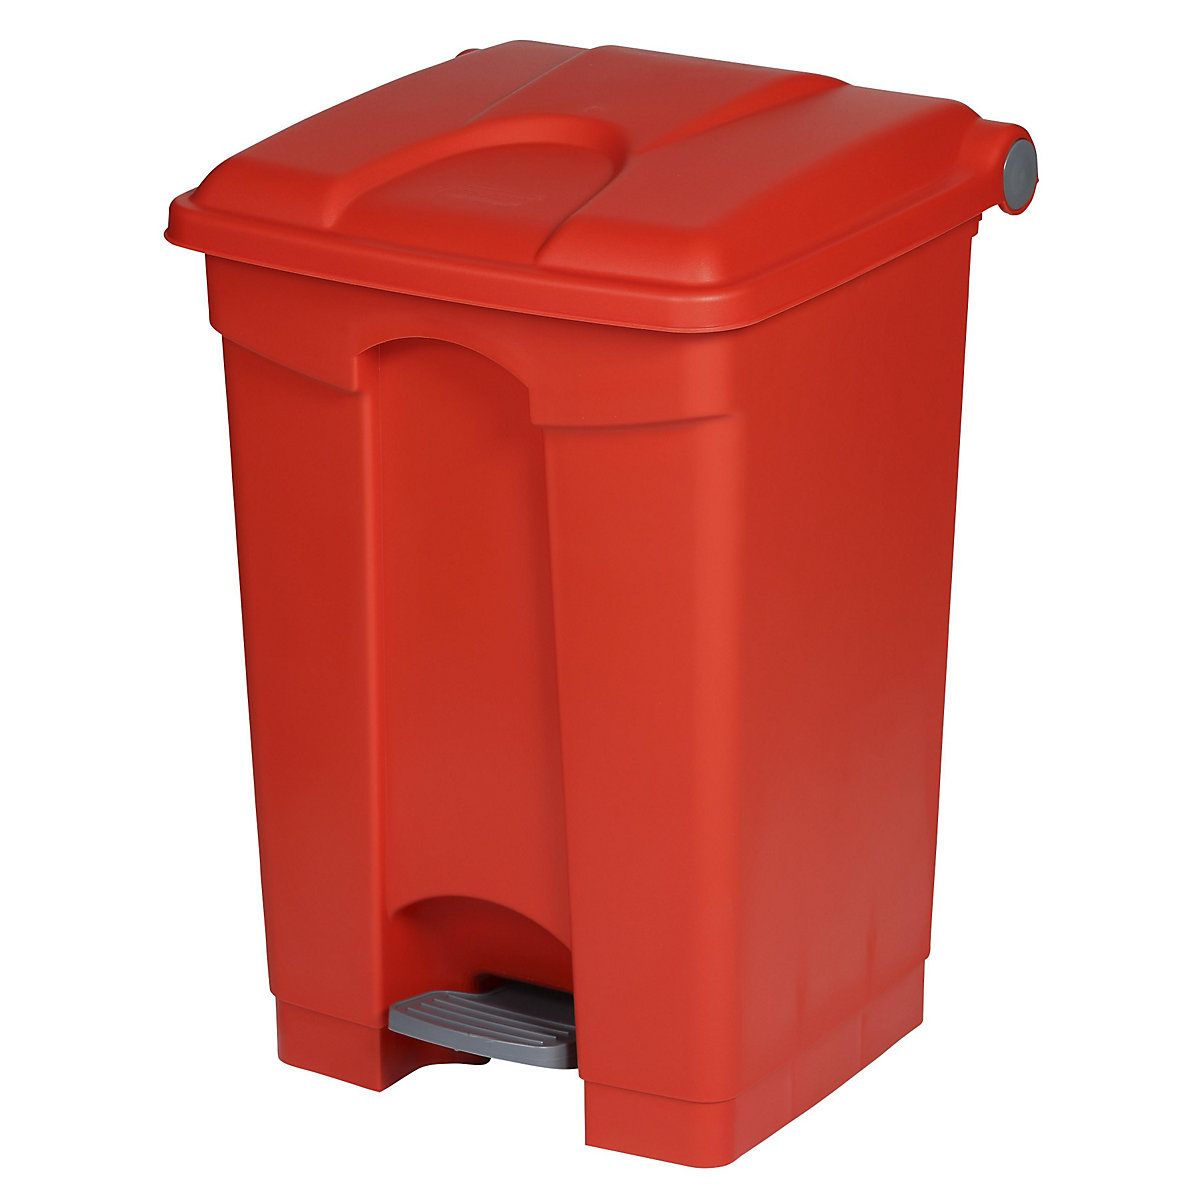 EUROKRAFTbasic – Pedal waste collector, capacity 45 l, WxHxD 410 x 600 x 400 mm, red